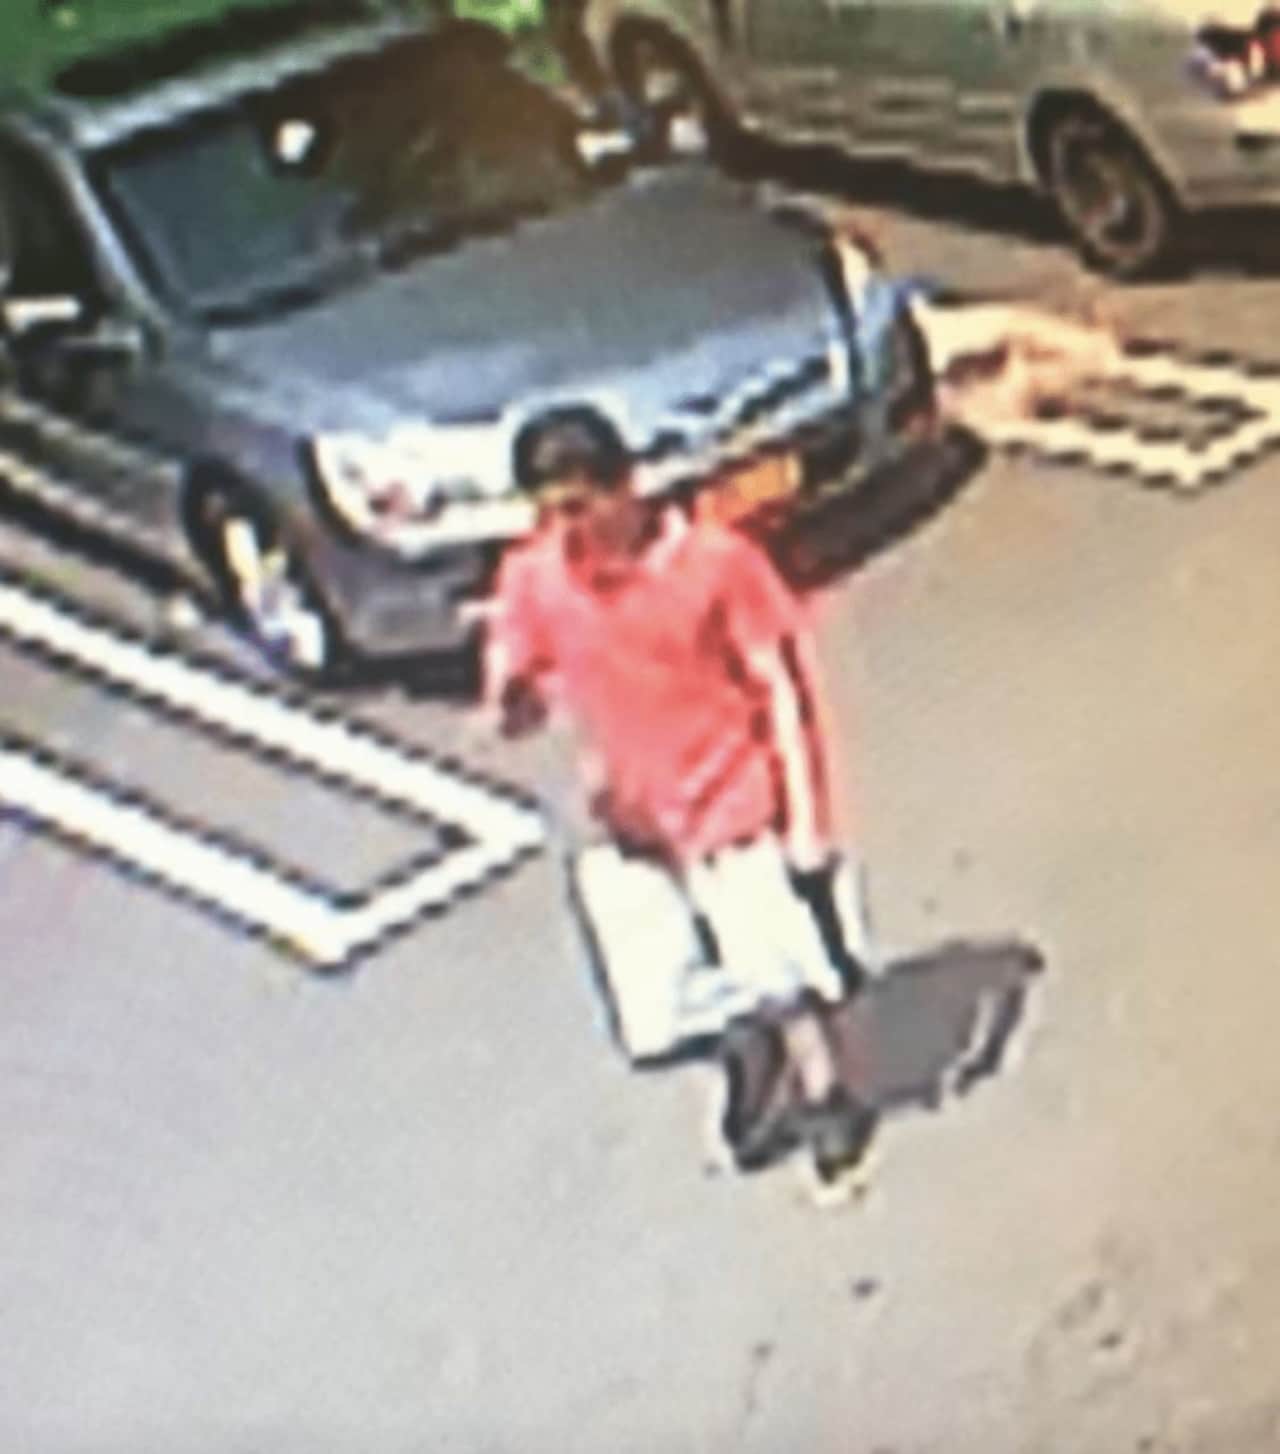 The Ramapo Police Department is attempting to identify this male in connection to a larceny investigation.